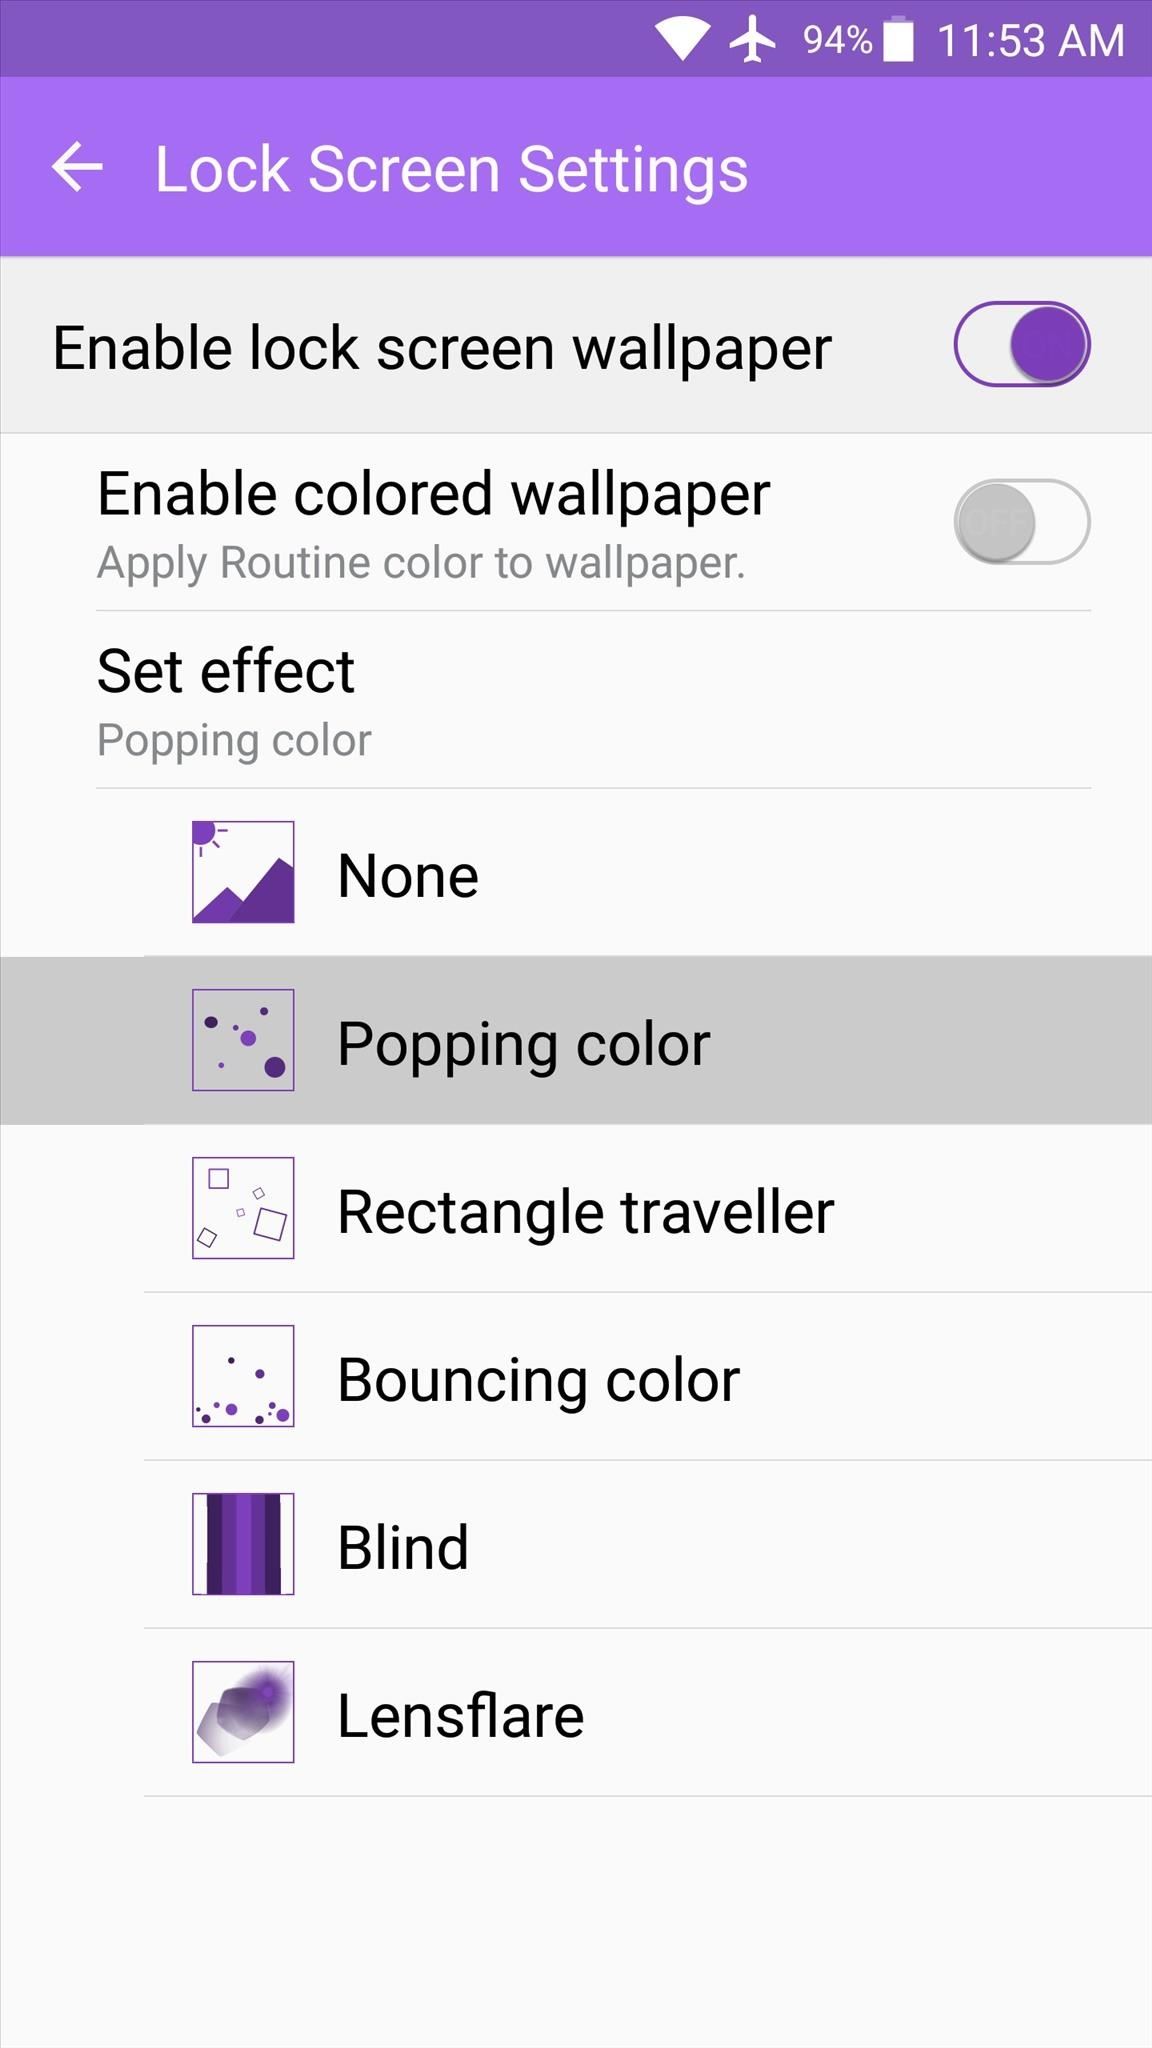 Samsung's Hidden App Lets You Drastically Change Your Galaxy's Look